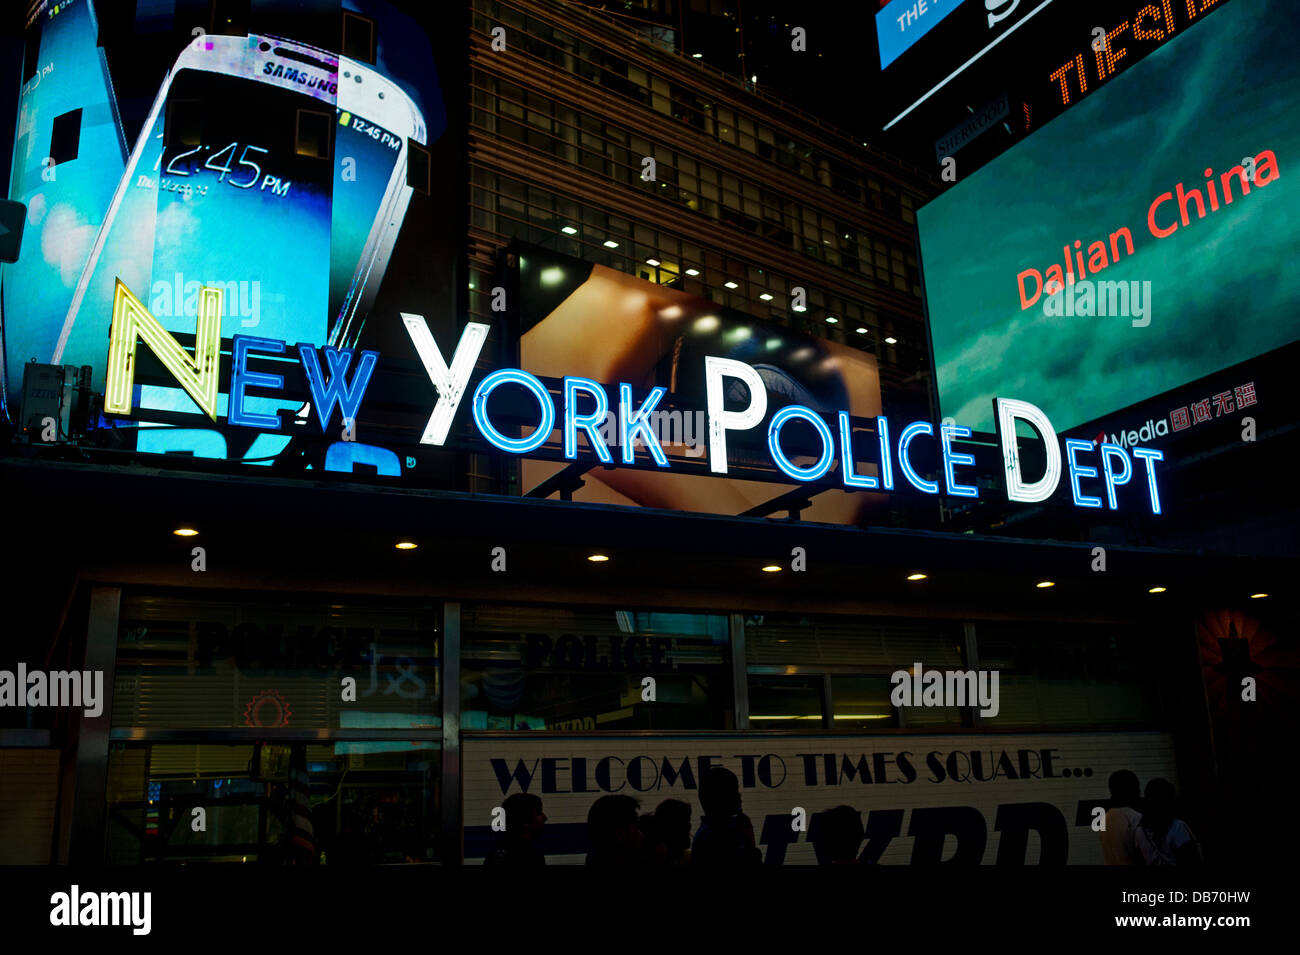 Times Square New York Police Department sign Stock Photo